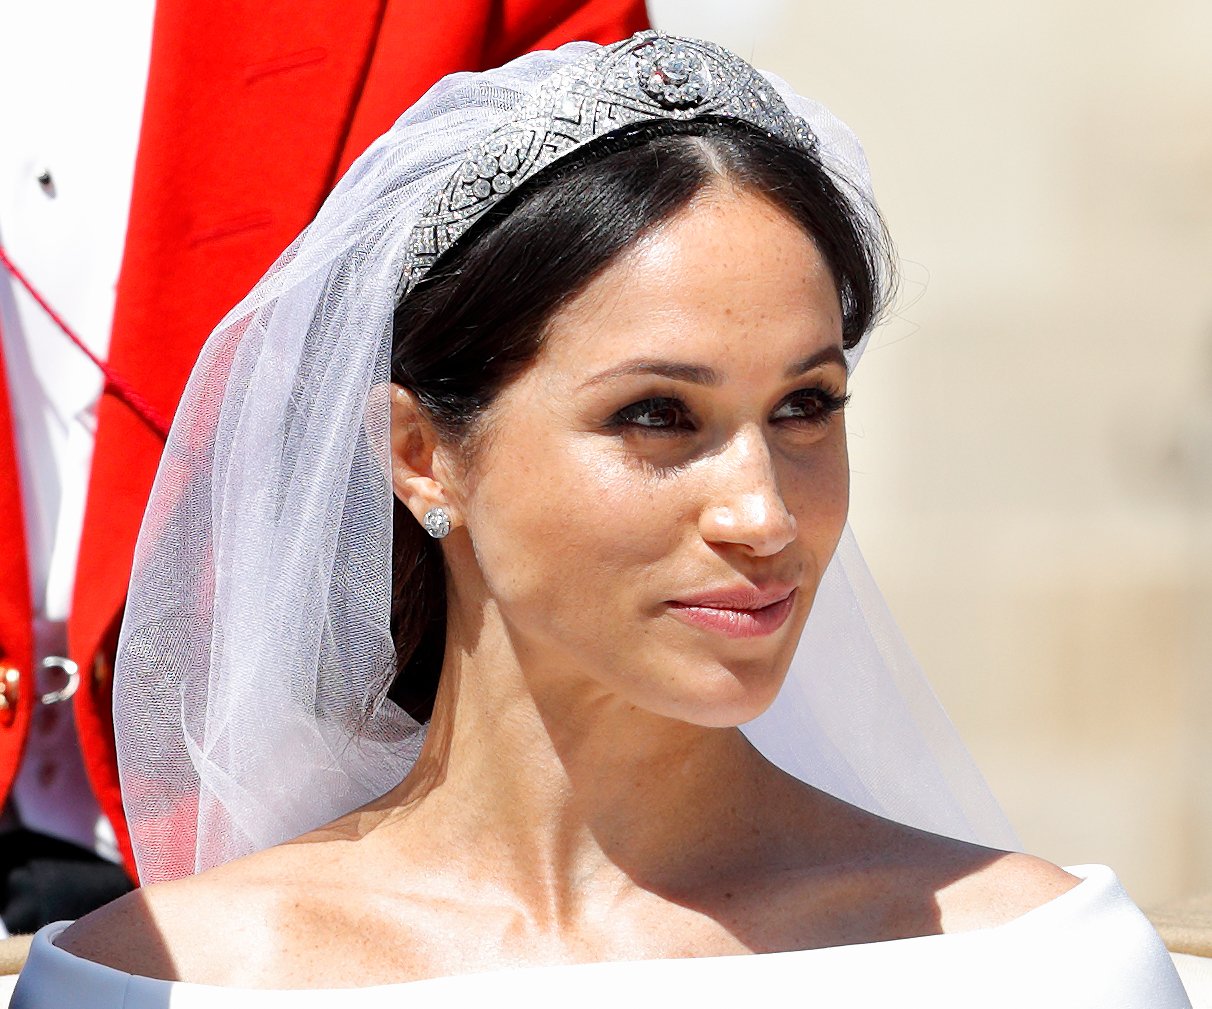 Meghan, Duchess of Sussex in Windsor following their wedding at St George's Chapel, Windsor Castle on May 19, 2018 in Windsor, England. | Source: Getty Images